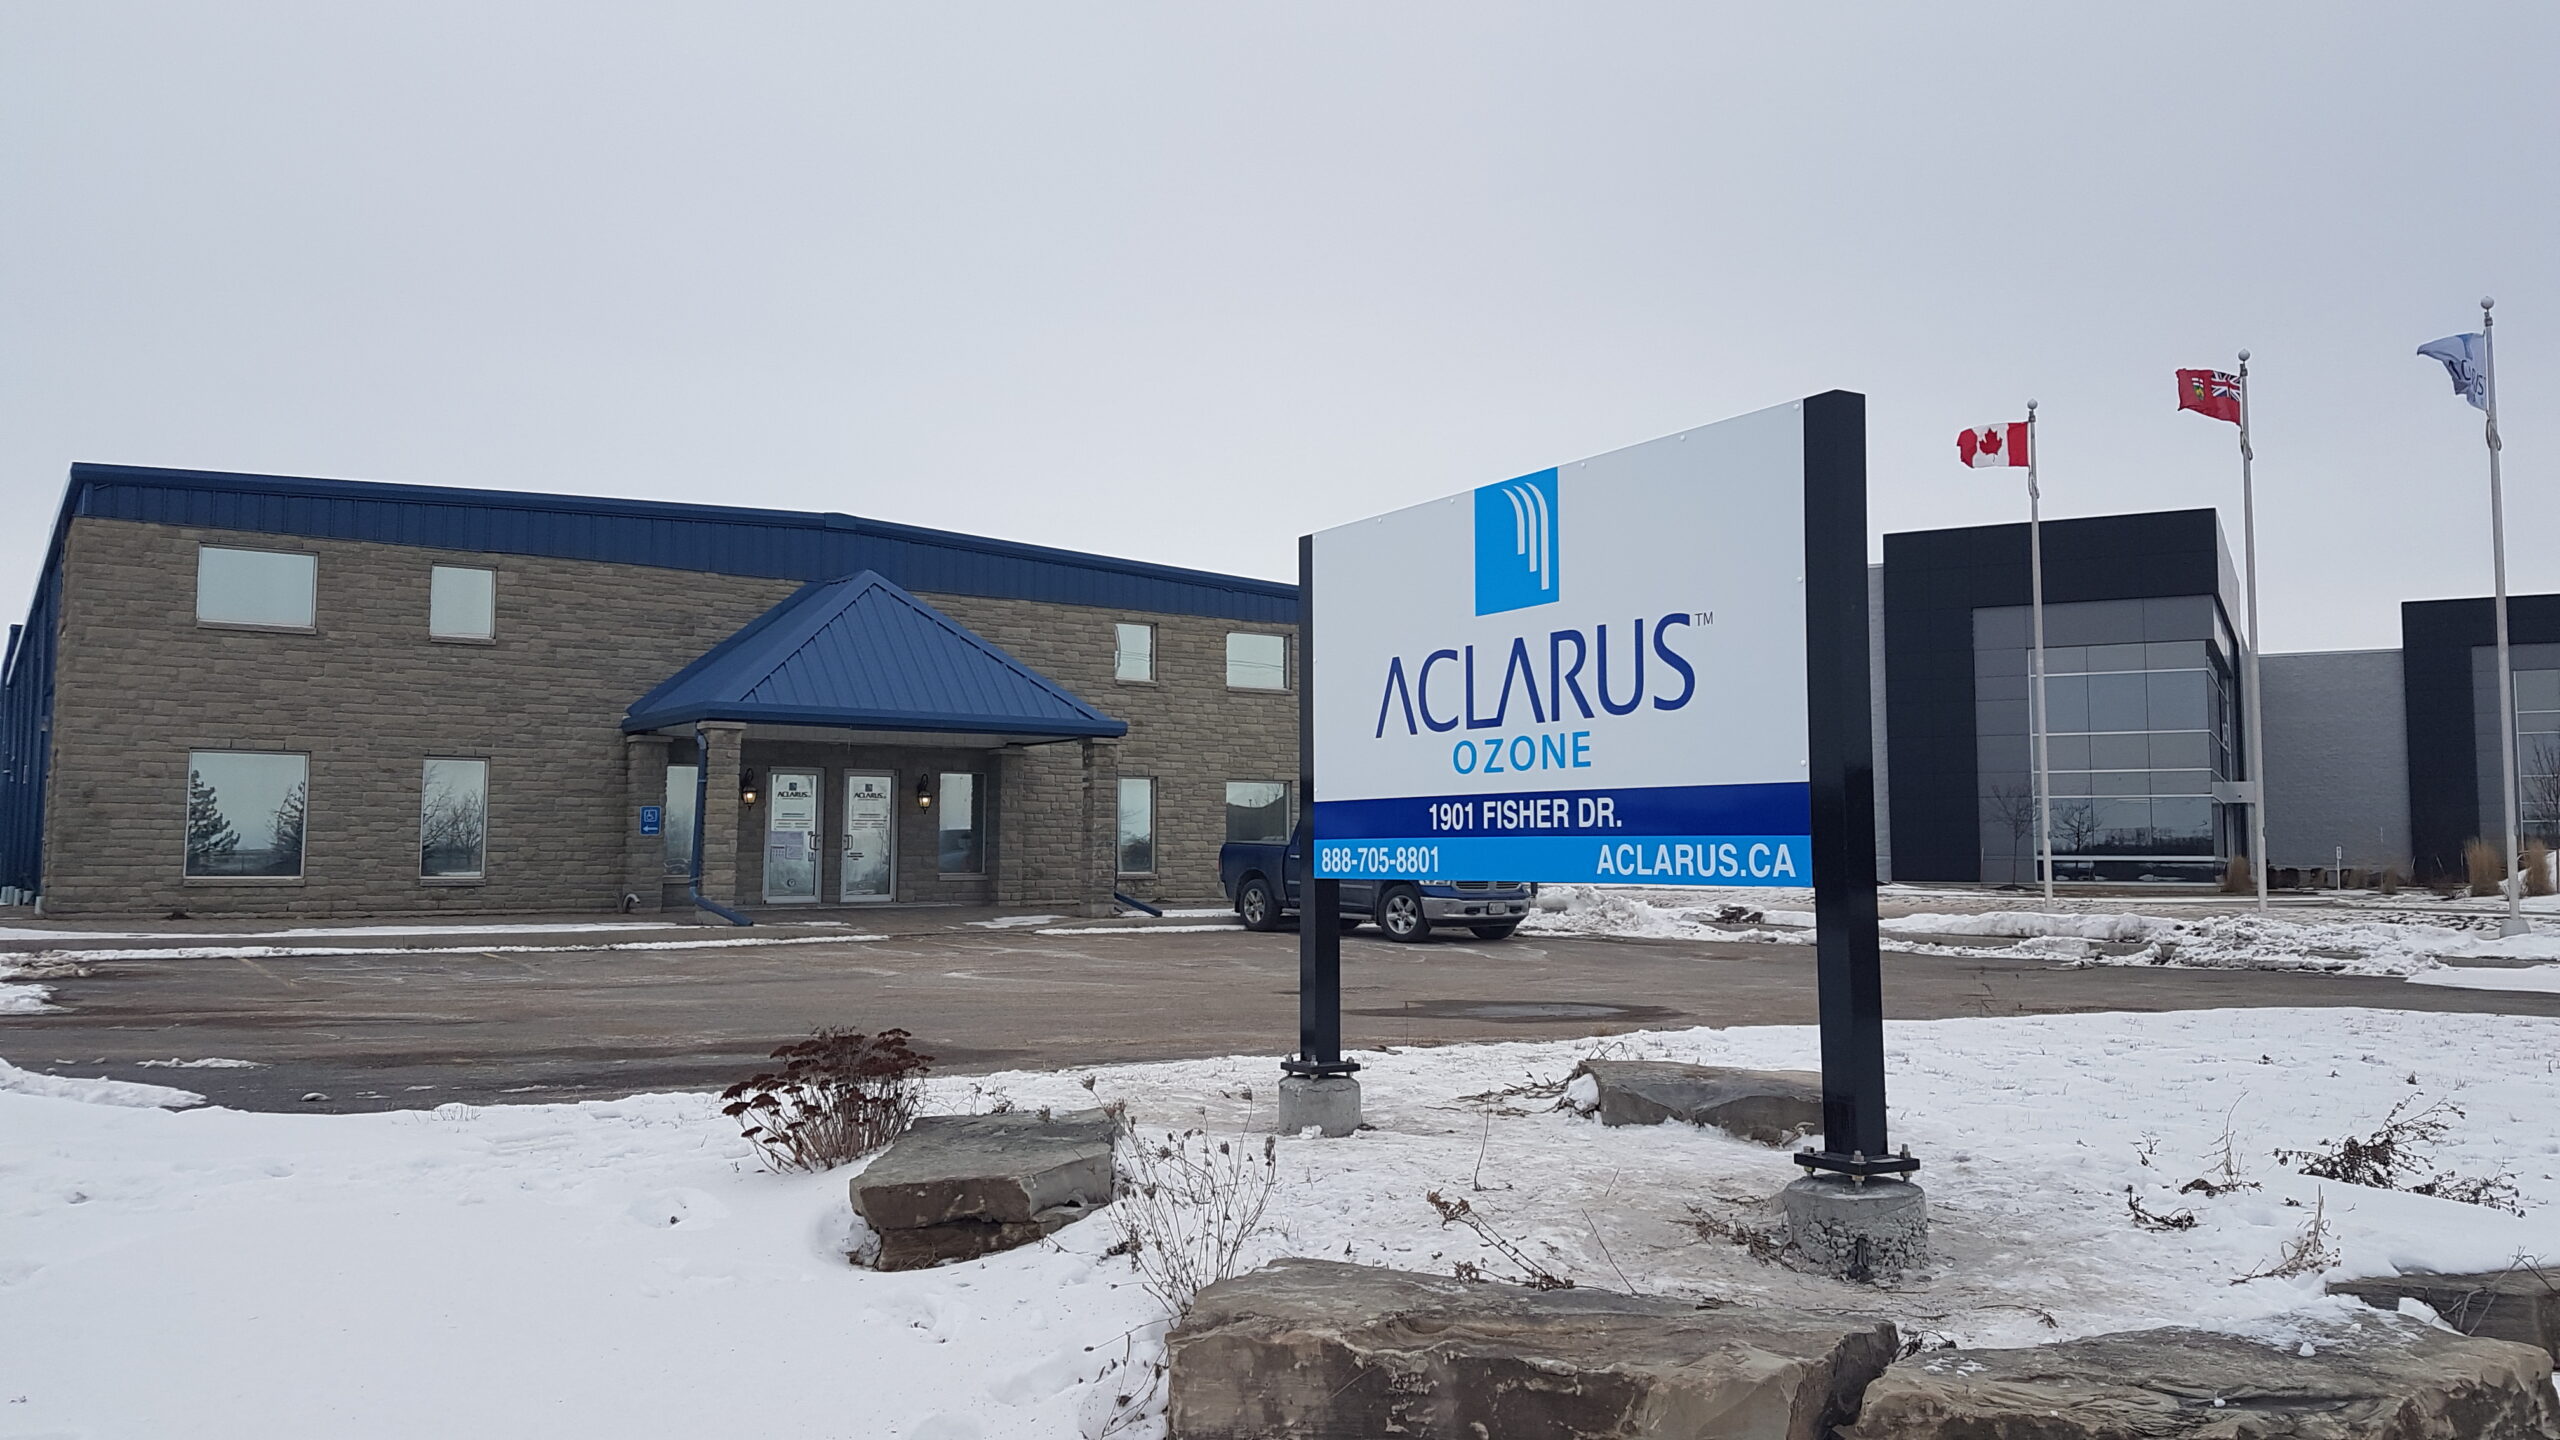 Front view of Aclarus ozone office